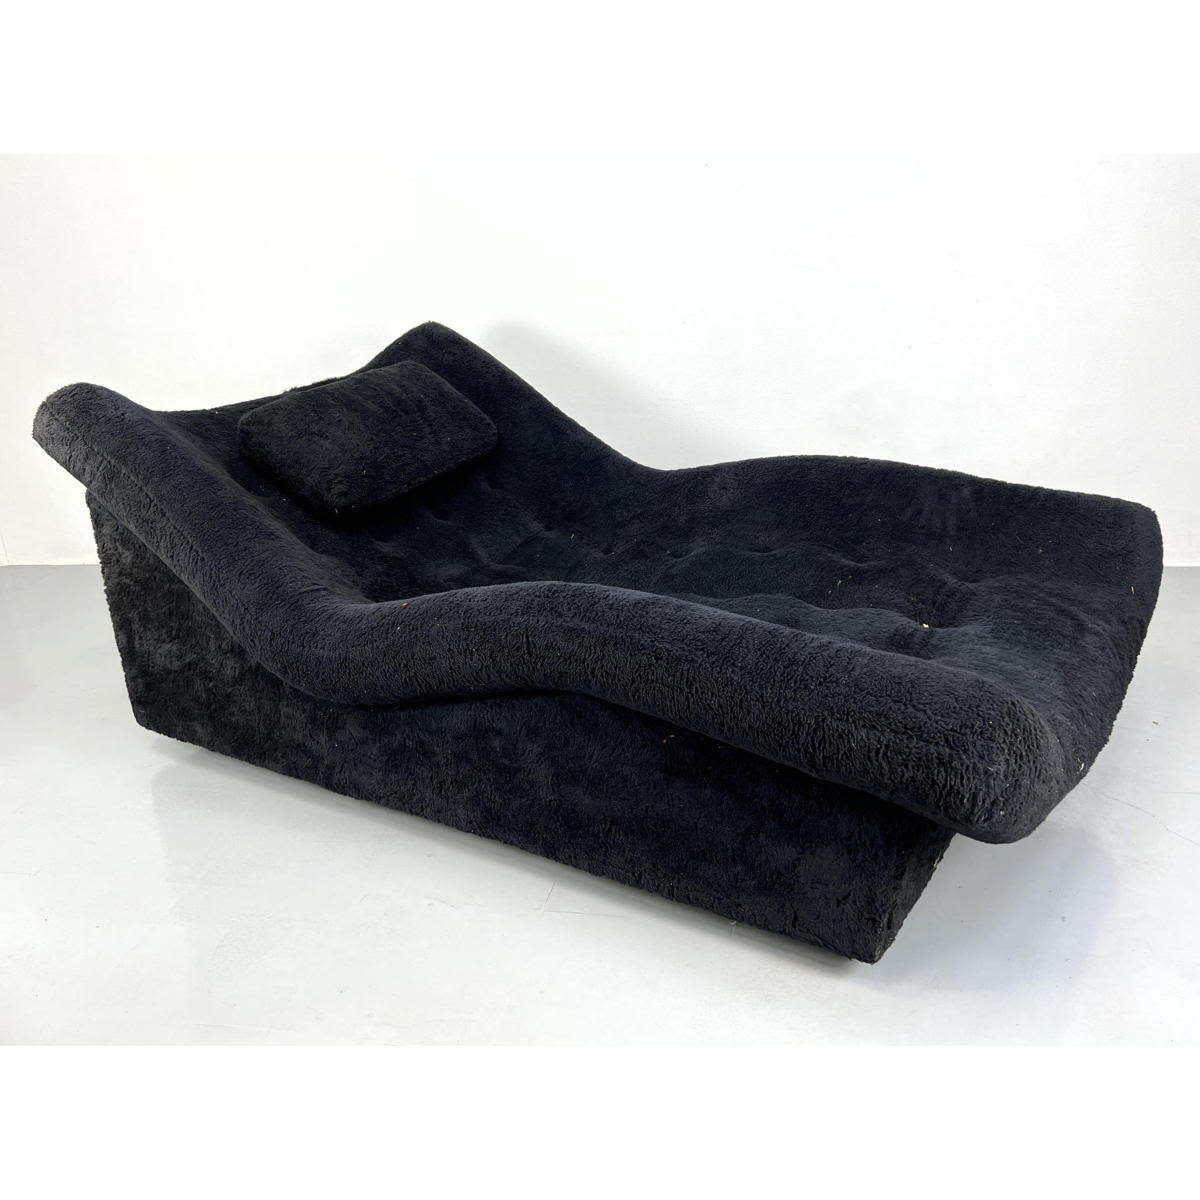 Oversized Modernist Wave Chaise